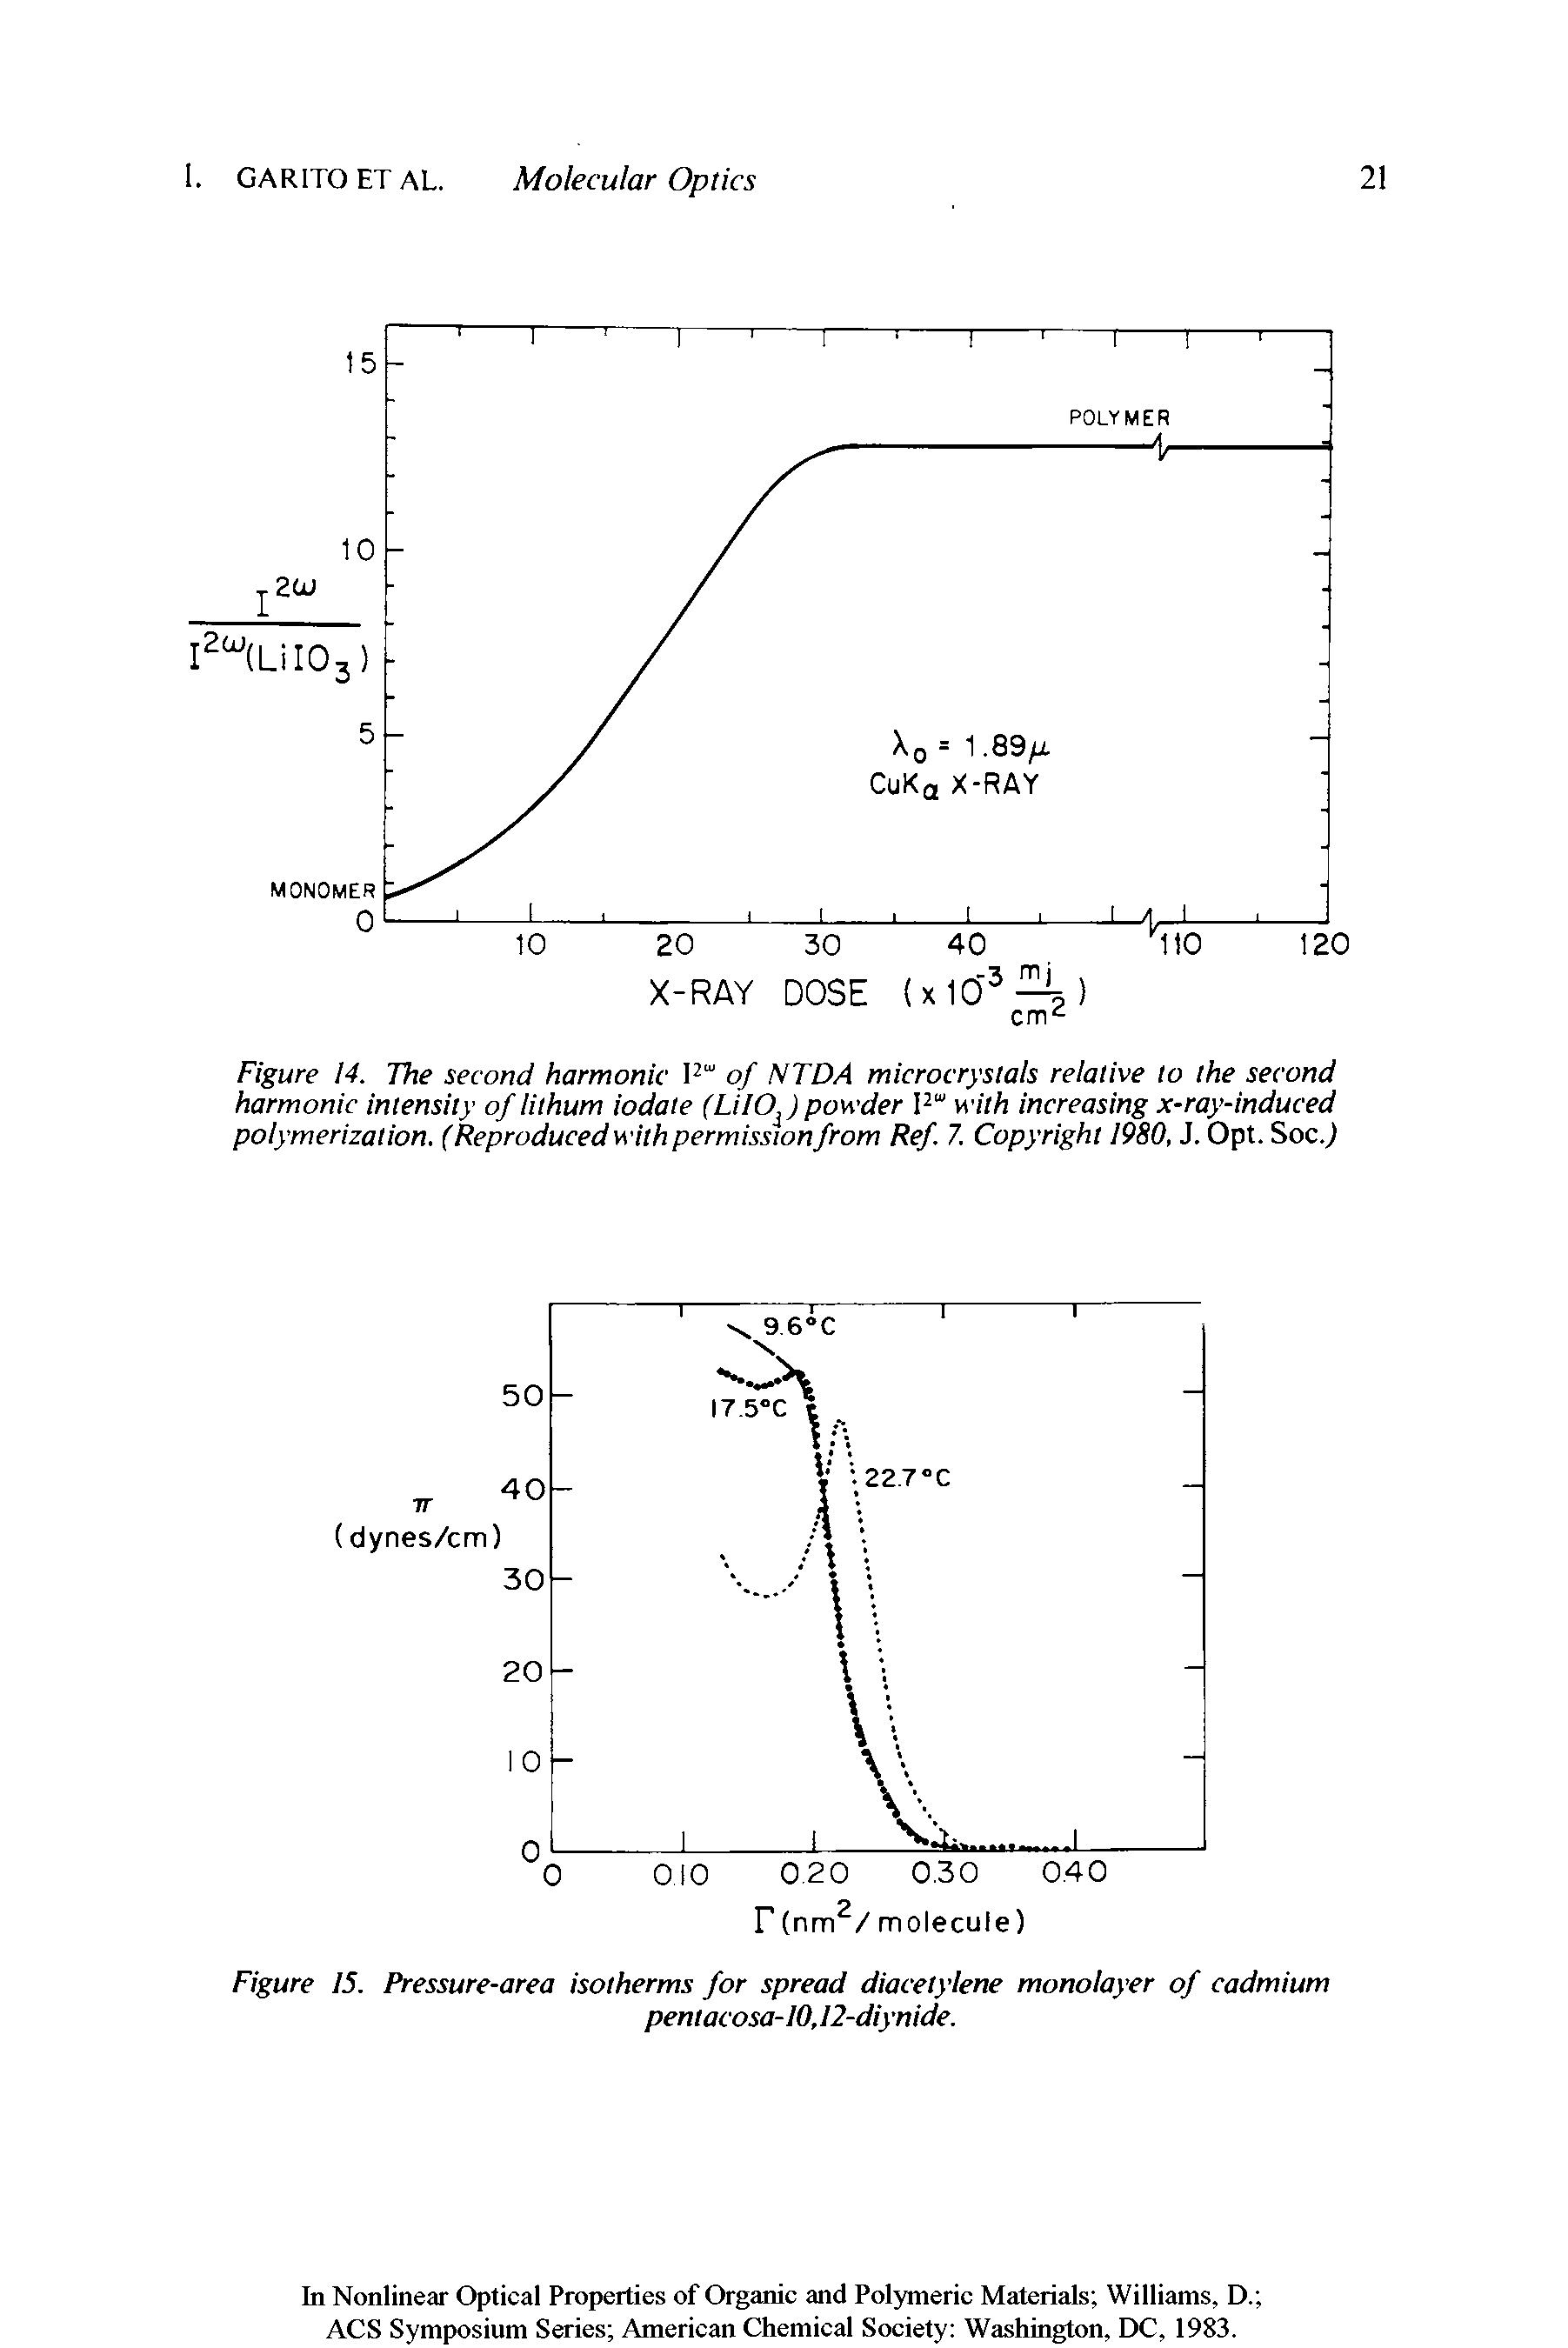 Figure 14. The second harmonic I2" of NTDA microcrystals relative to the second harmonic intensity of lithum iodate (LilOi) powder I2" with increasing x-ray-induced polymerization. (Reproduced with permissionfrom Ref. 7. Copyright 1980, J. Opt. Soc.)...